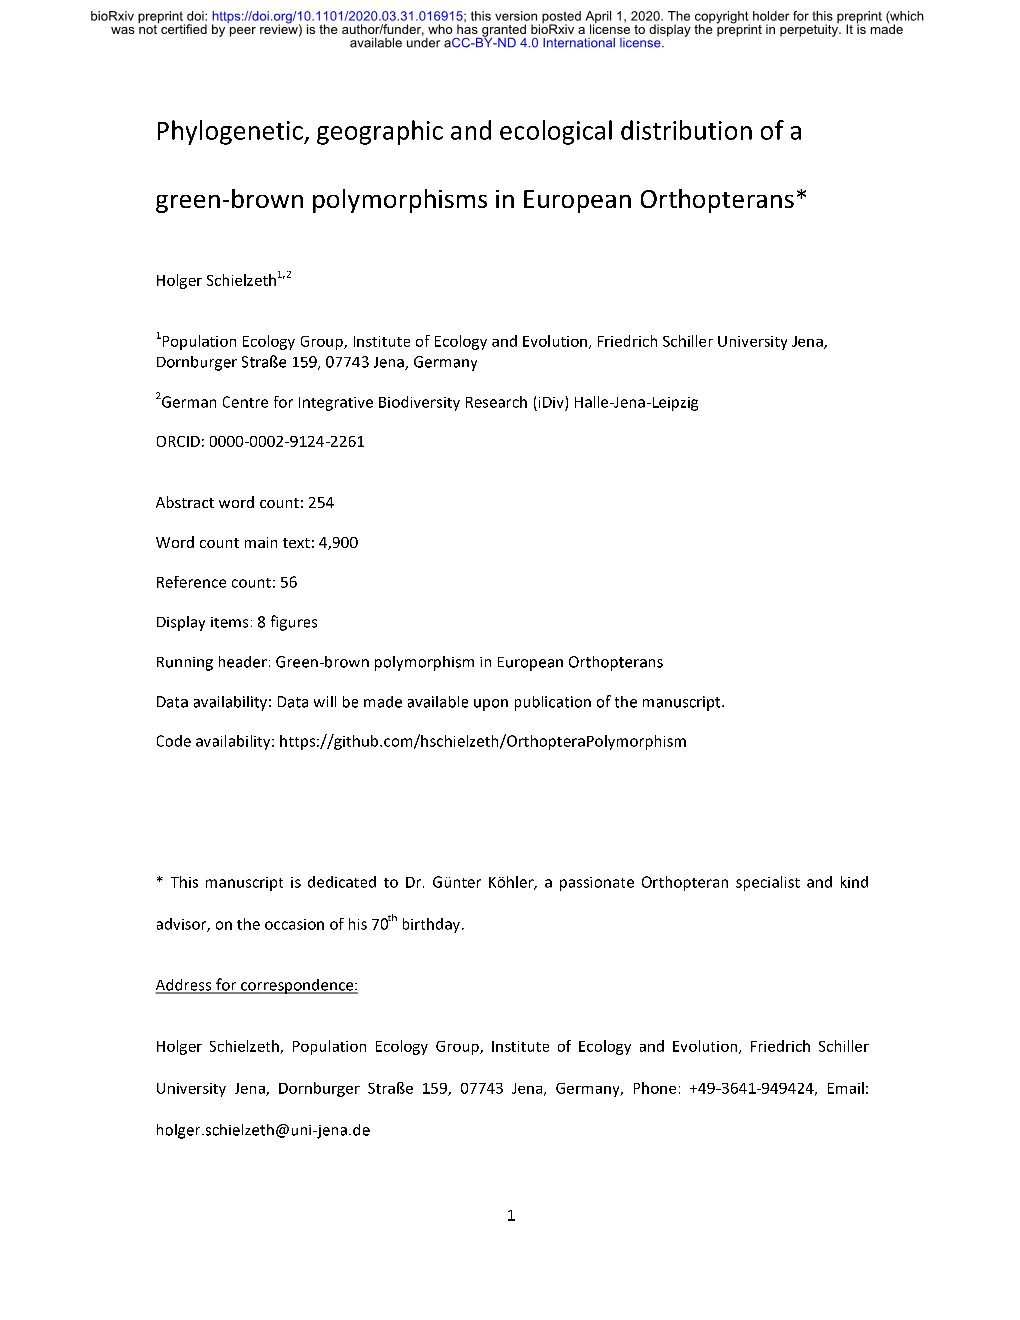 Phylogenetic, Geographic and Ecological Distribution of a Green-Brown Polymorphisms in European Orthopterans